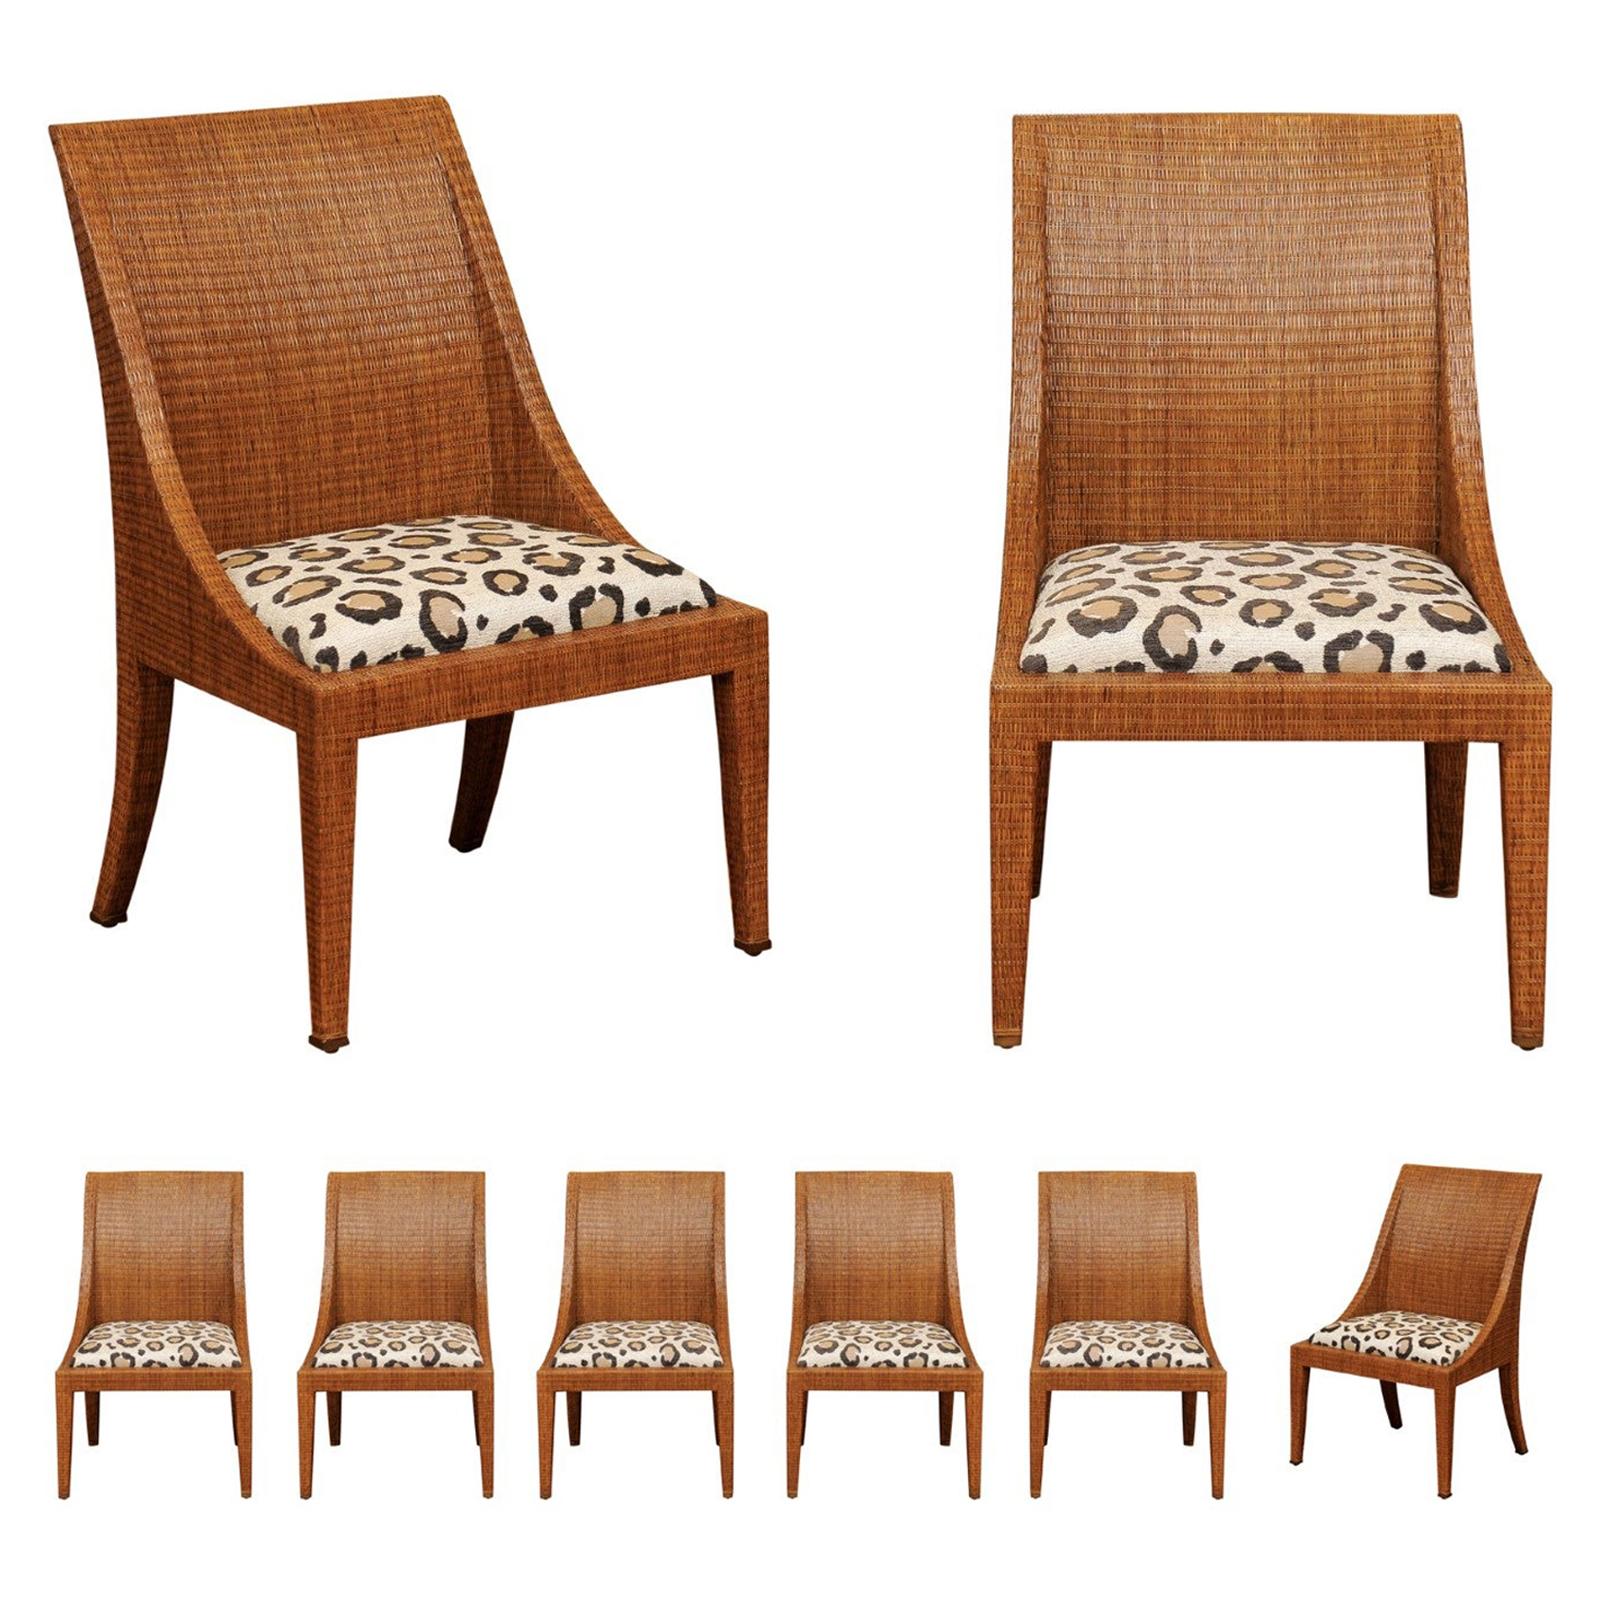 Elegant Restored Set of 8 Cane Dining Chairs by McGuire